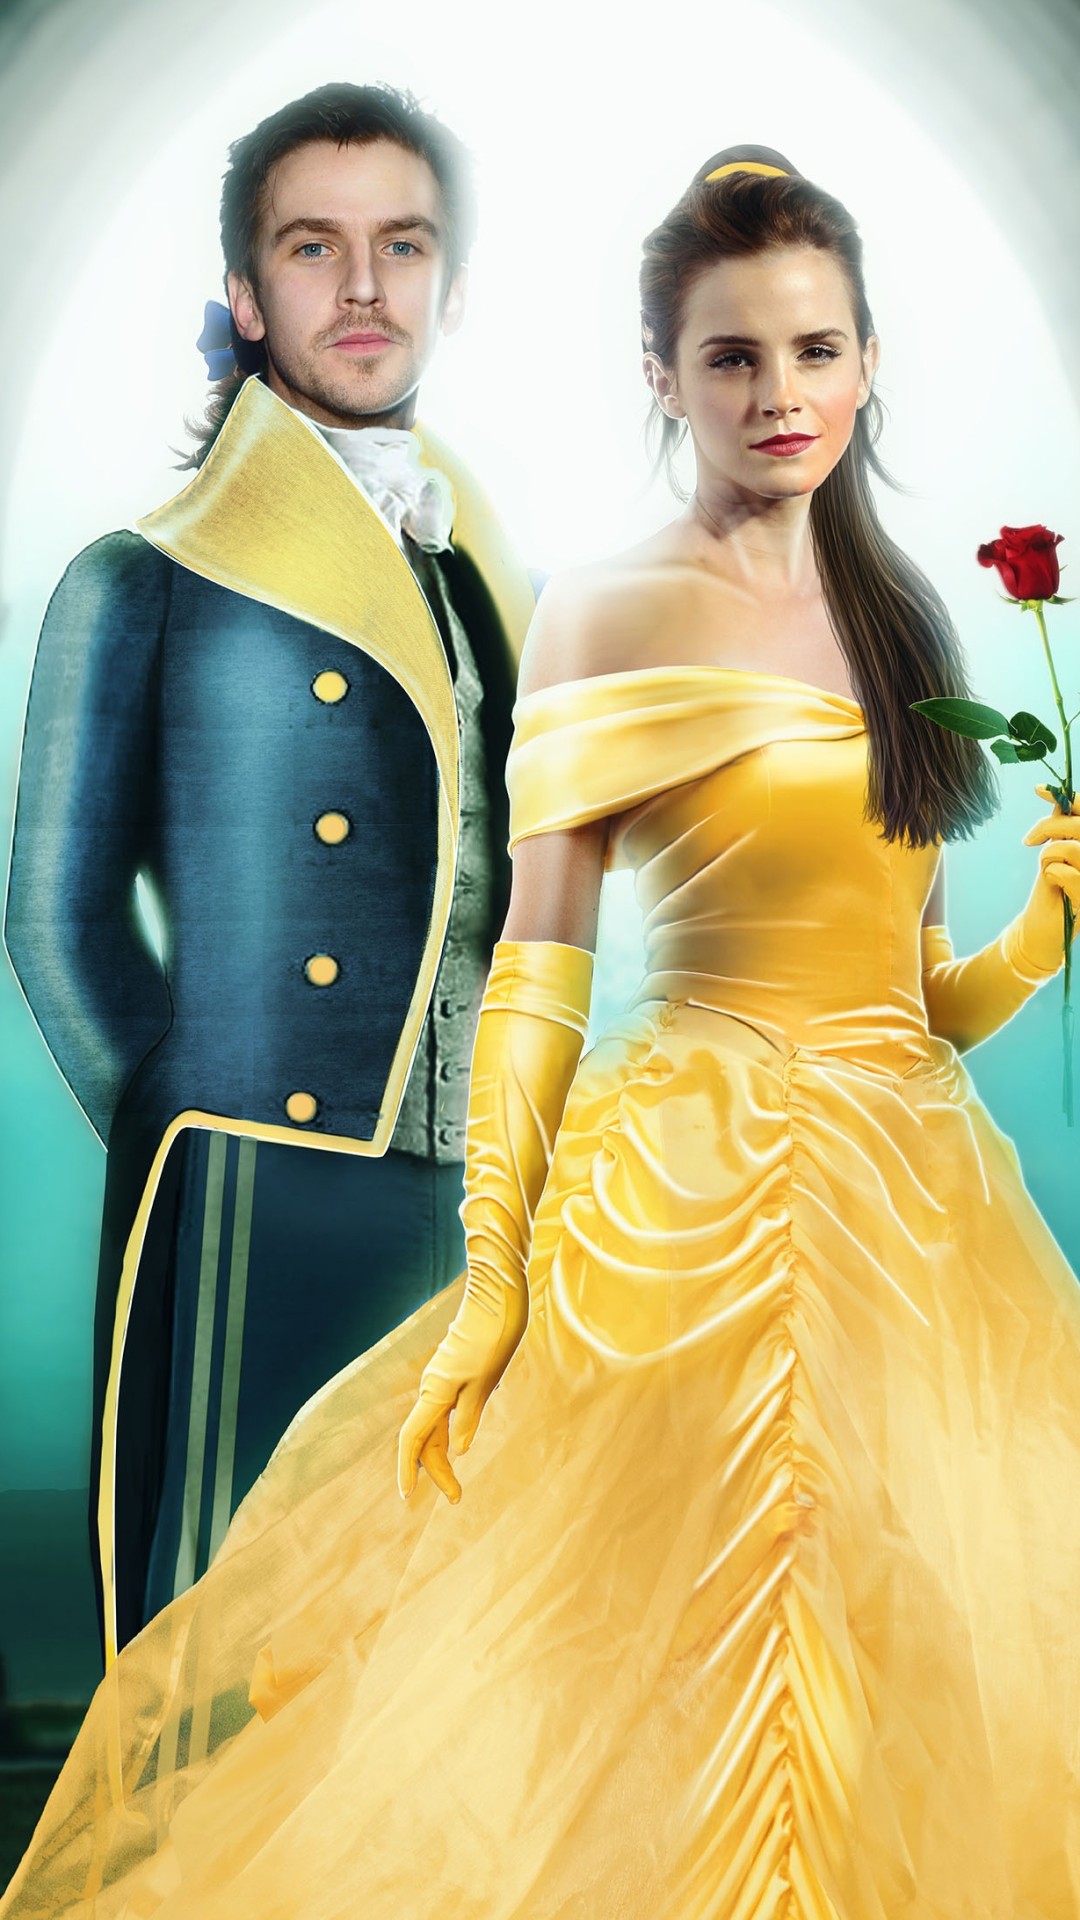 Beauty And Beast Wallpaper